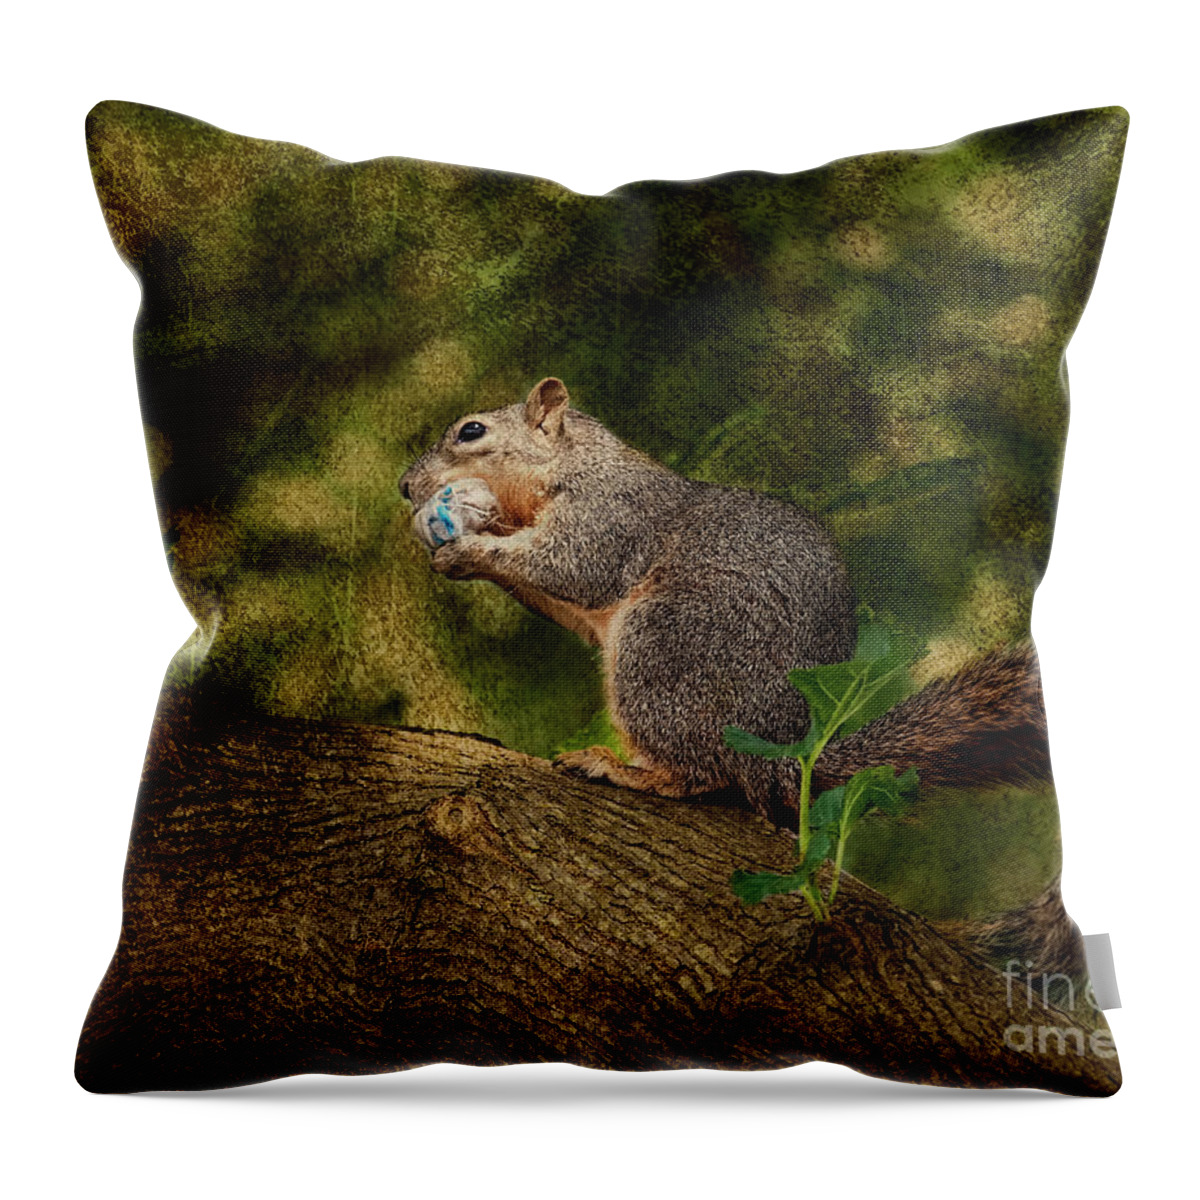 Squirrel Throw Pillow featuring the photograph Her Treasure by Joan Bertucci